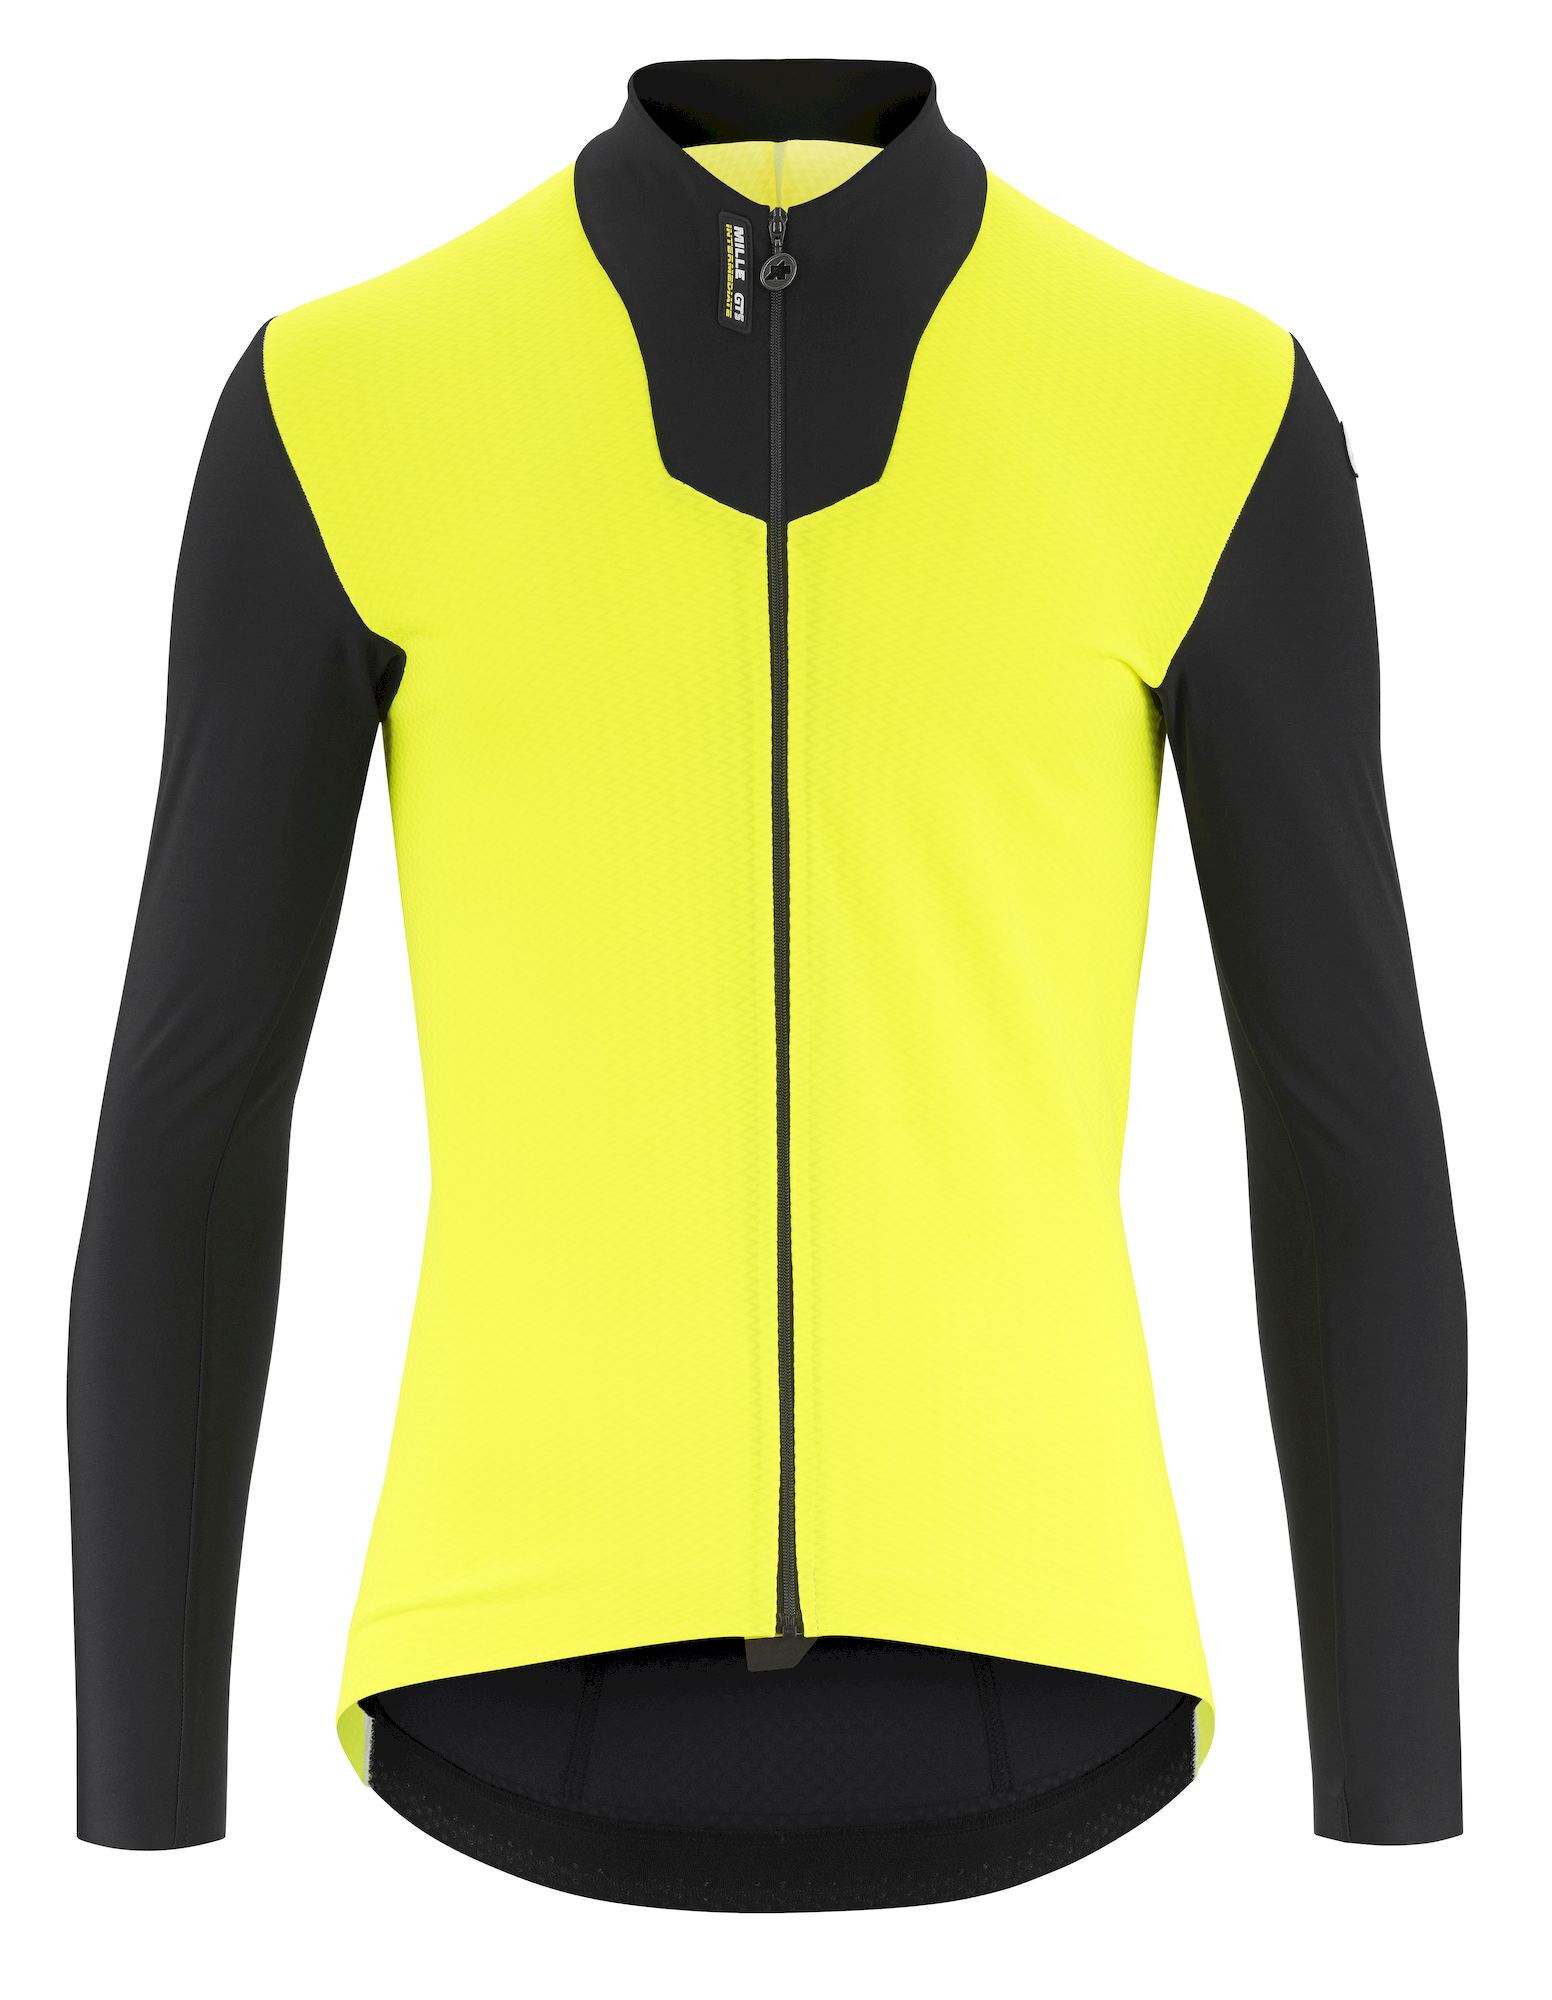 Assos Mille GTS Spring Fall Jacket C2 - Giacca ciclismo | Hardloop